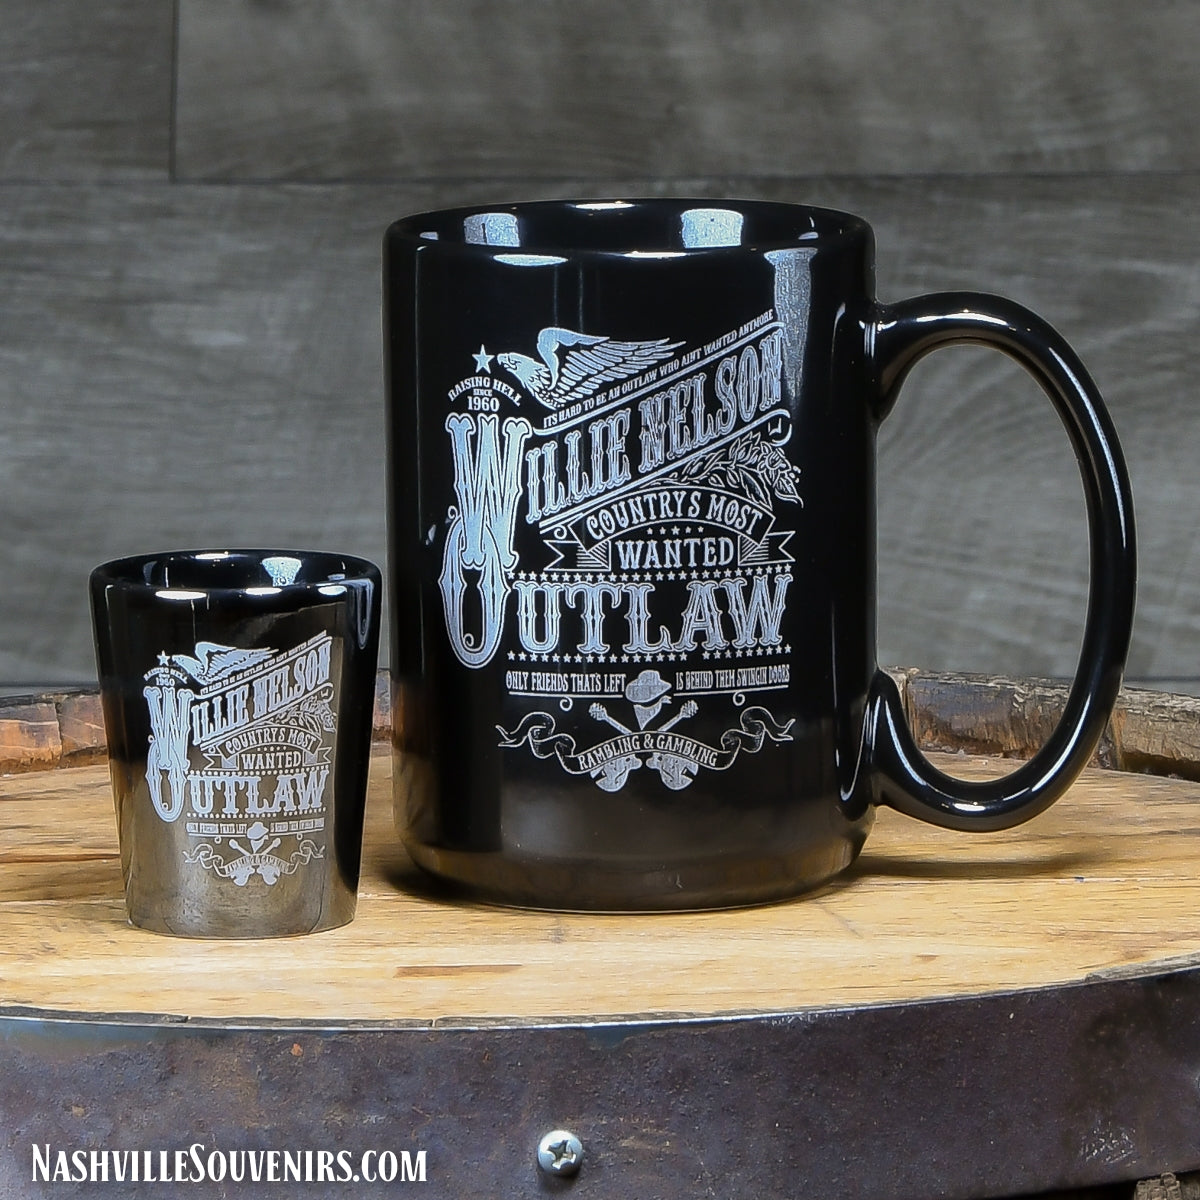 Willie Nelson Mug and Shotglass "Countrys Most Wanted Outlaw"